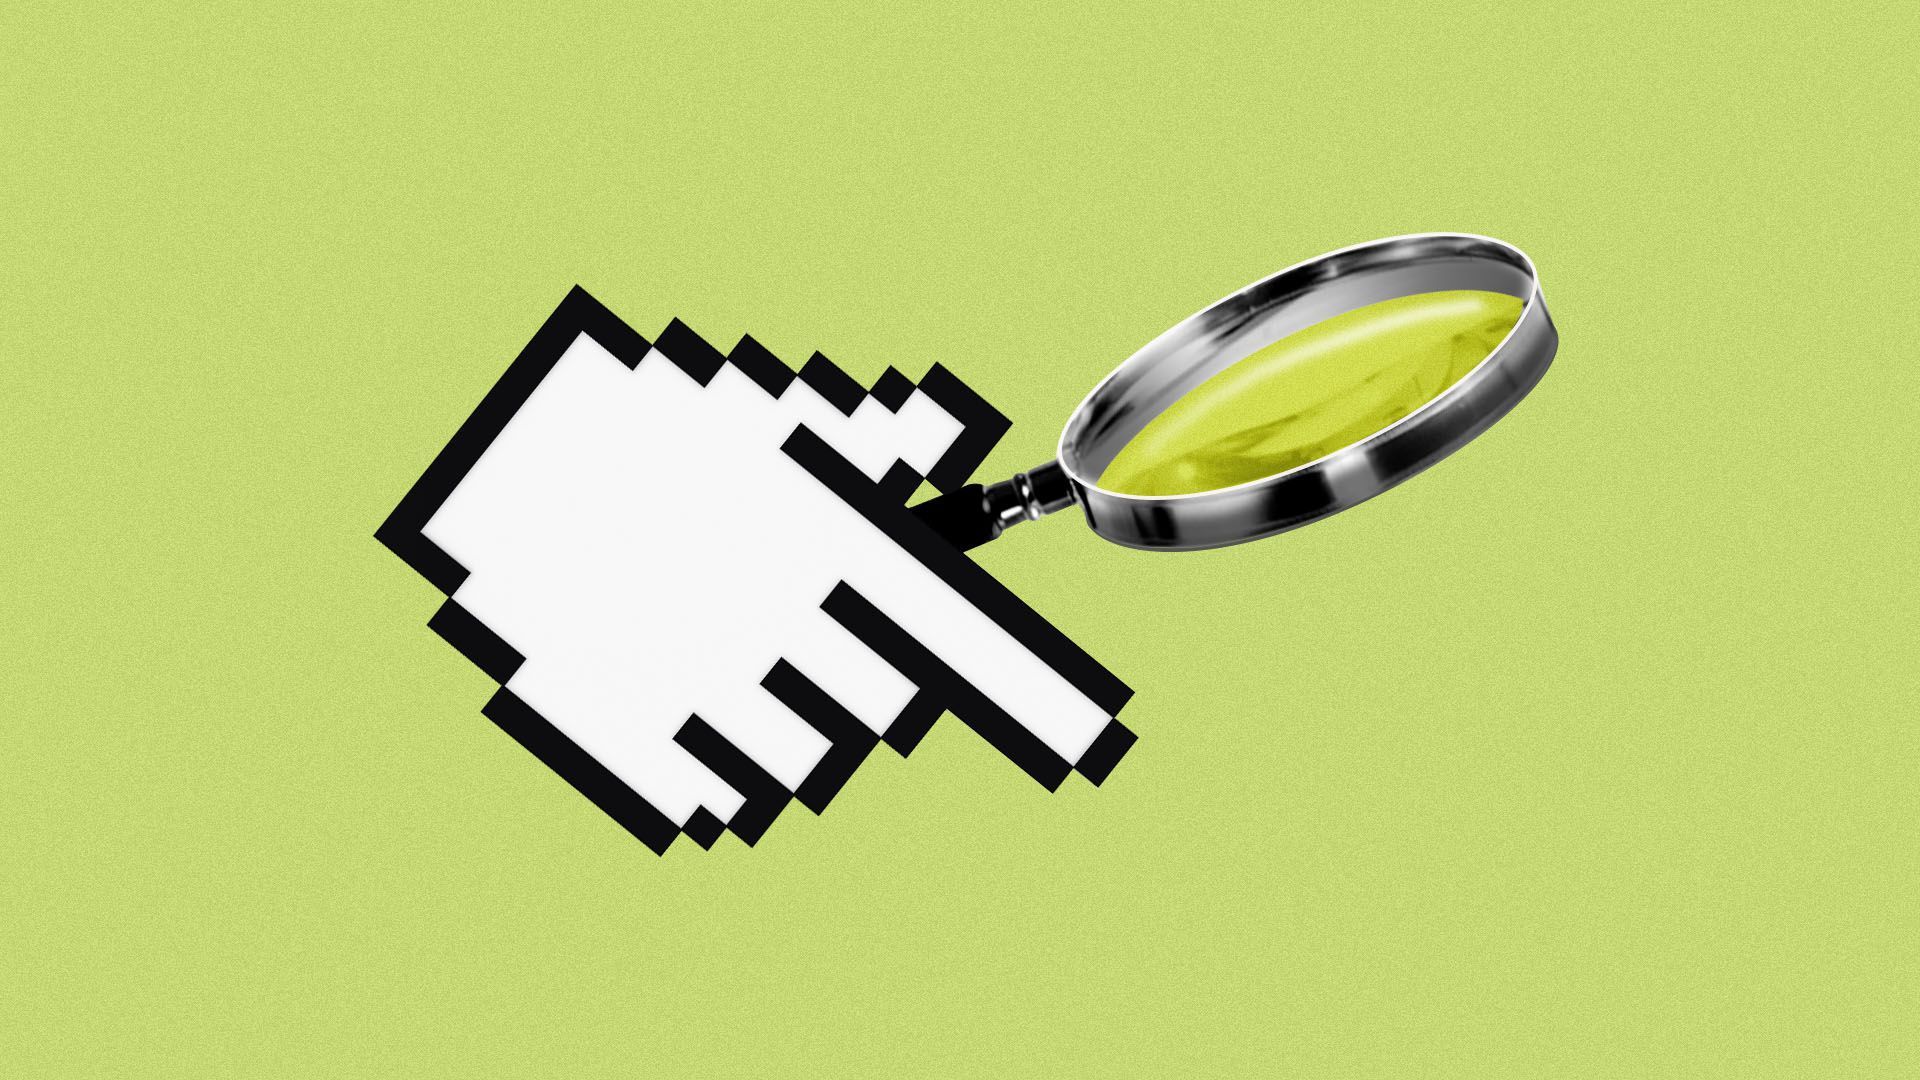 Illustration of a digital hand holding a magnifying glass